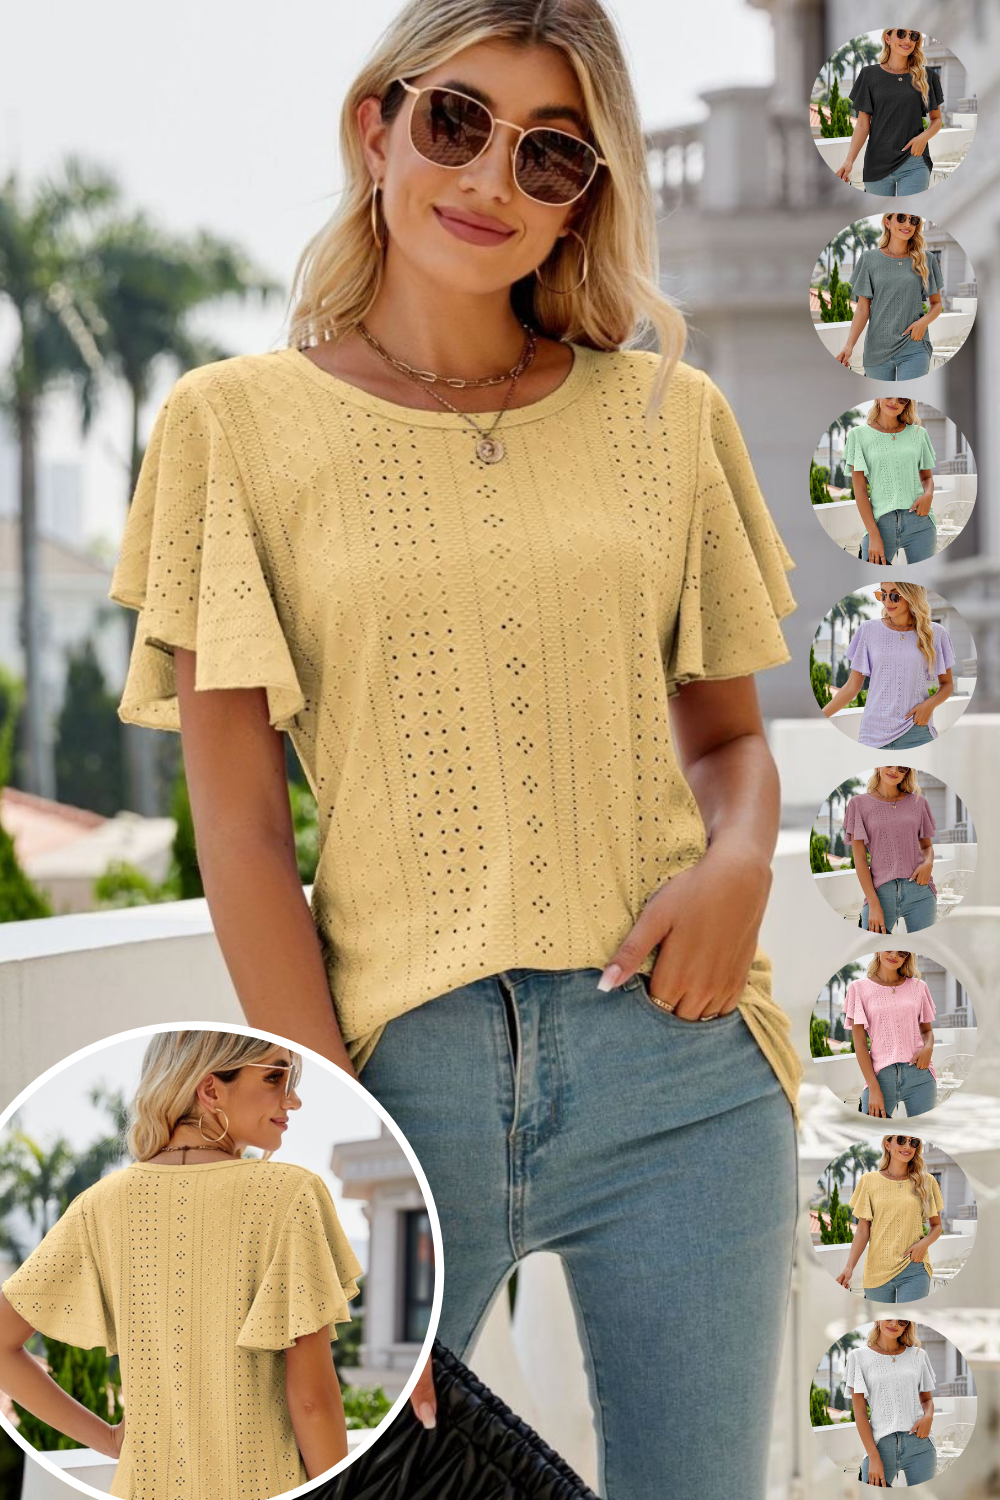 Womens Misses Short Sleeve Eloise Eyelet Flutter Sleeve Round Neck Blouse Top in several color options: Black, White, Light Lime Green, Sage Green, Lilac Lavender Purple, Dusty Purple Mauve, Blush Pink Baby Pink, Yellow, White